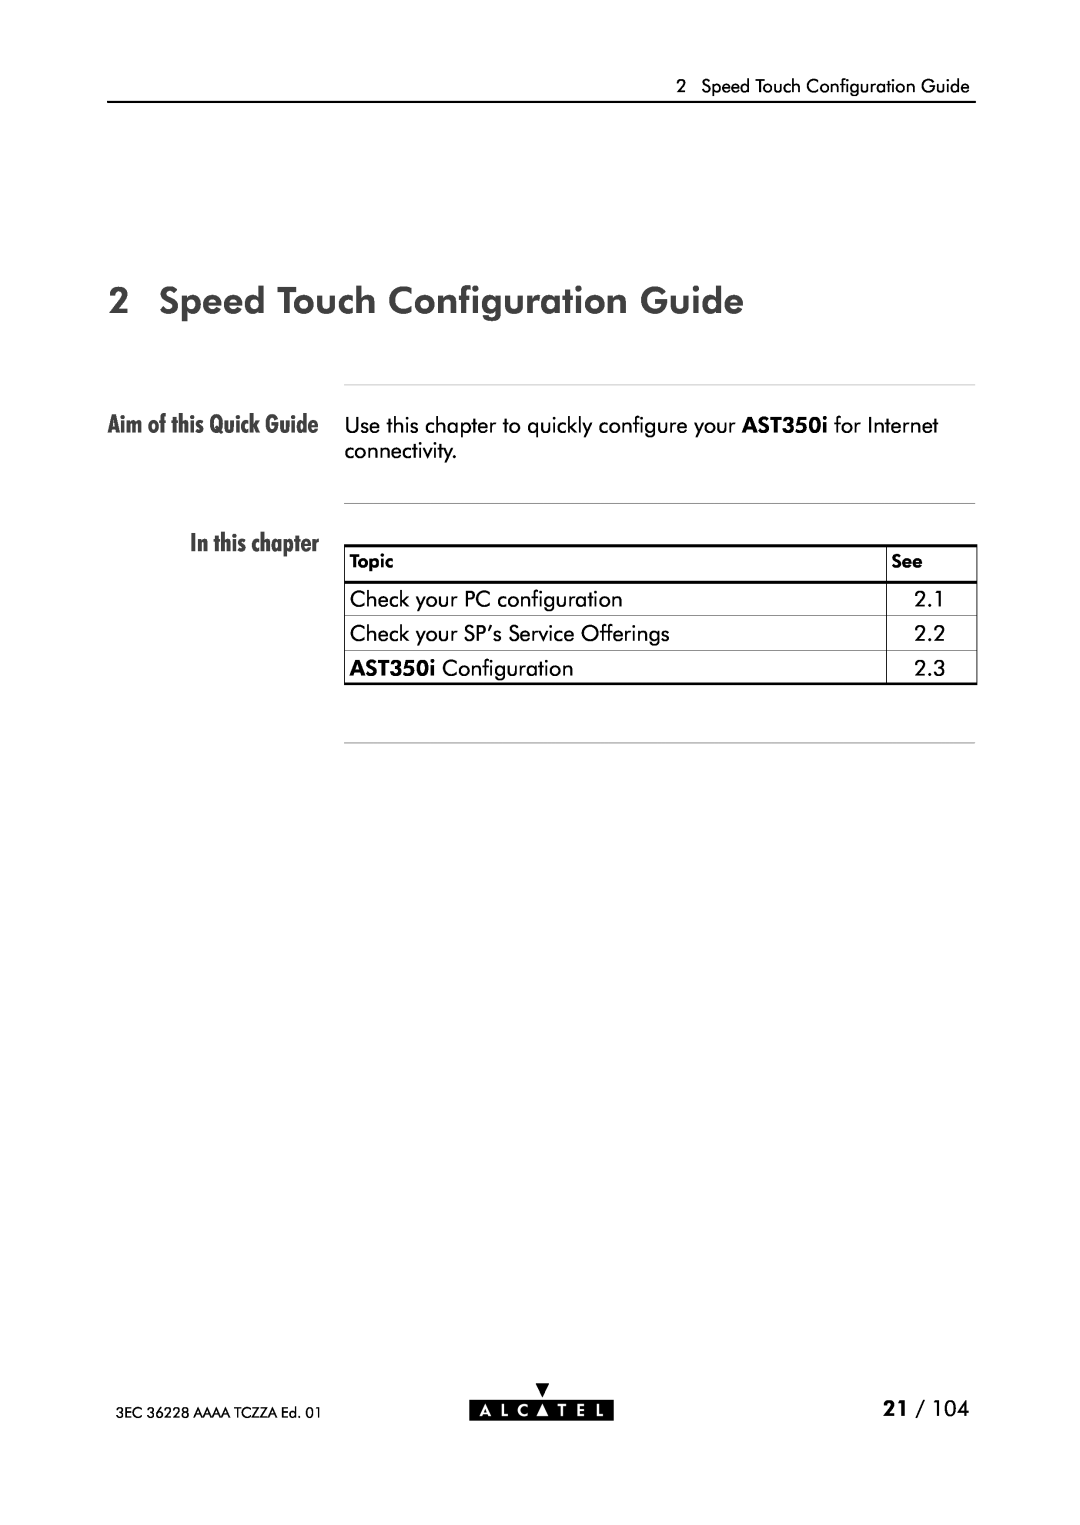 Alcatel Carrier Internetworking Solutions 350I Speed Touch Configuration Guide, In this chapter, Aim of this Quick Guide 